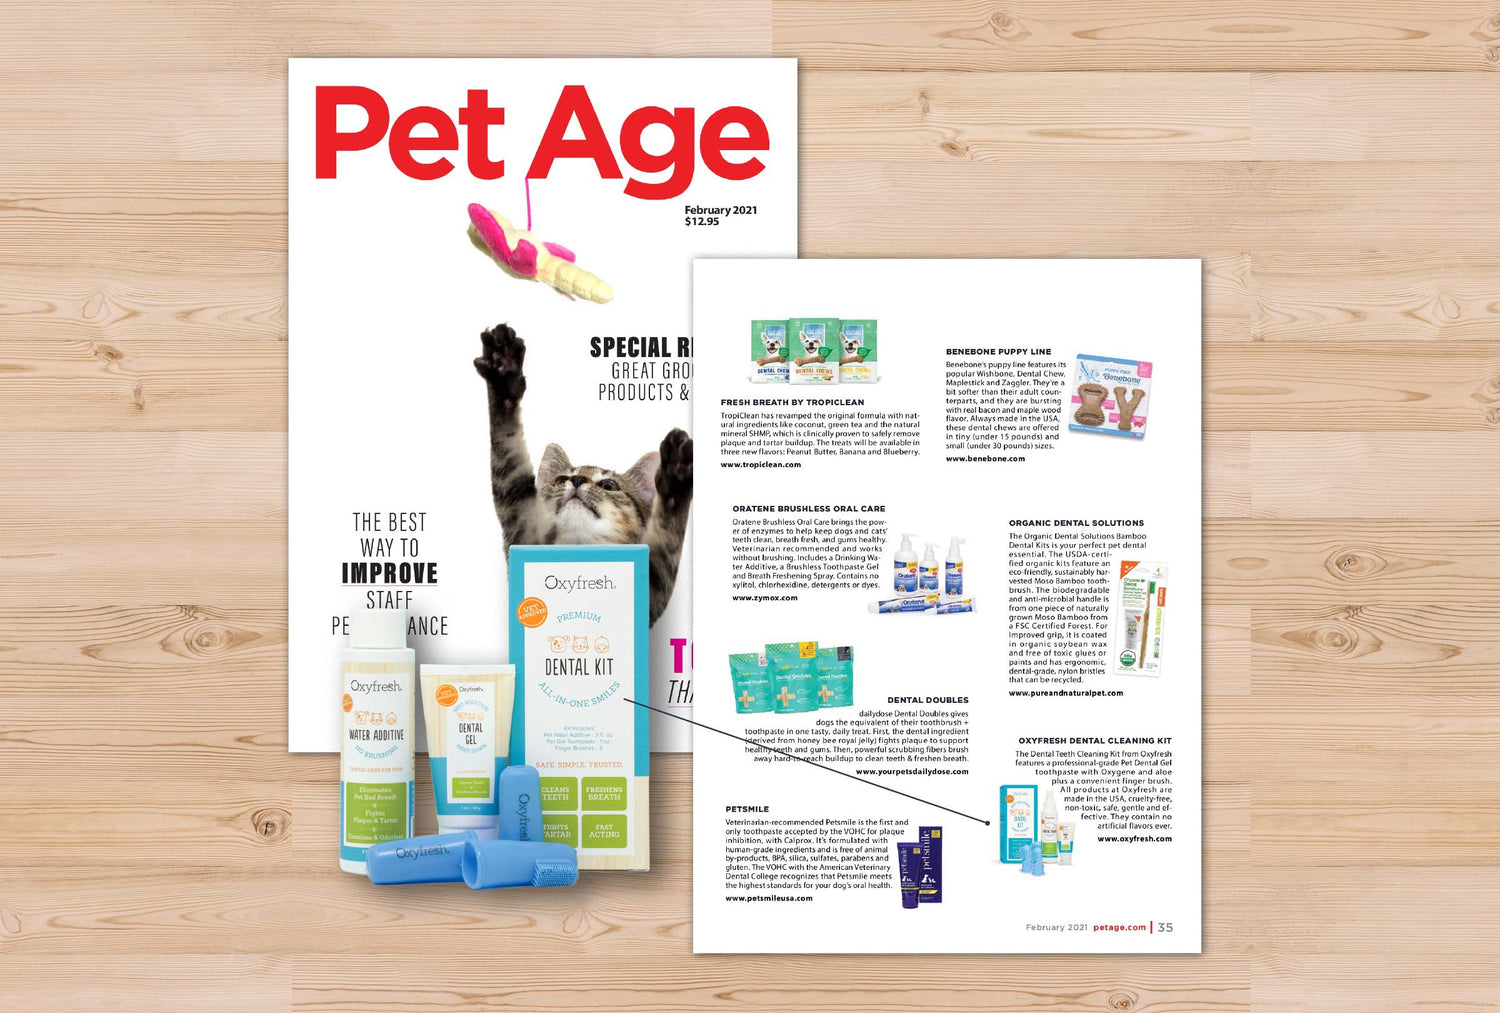 Oxyfresh Pet Dental Kit Featured in February 2021 Issue of Pet Age